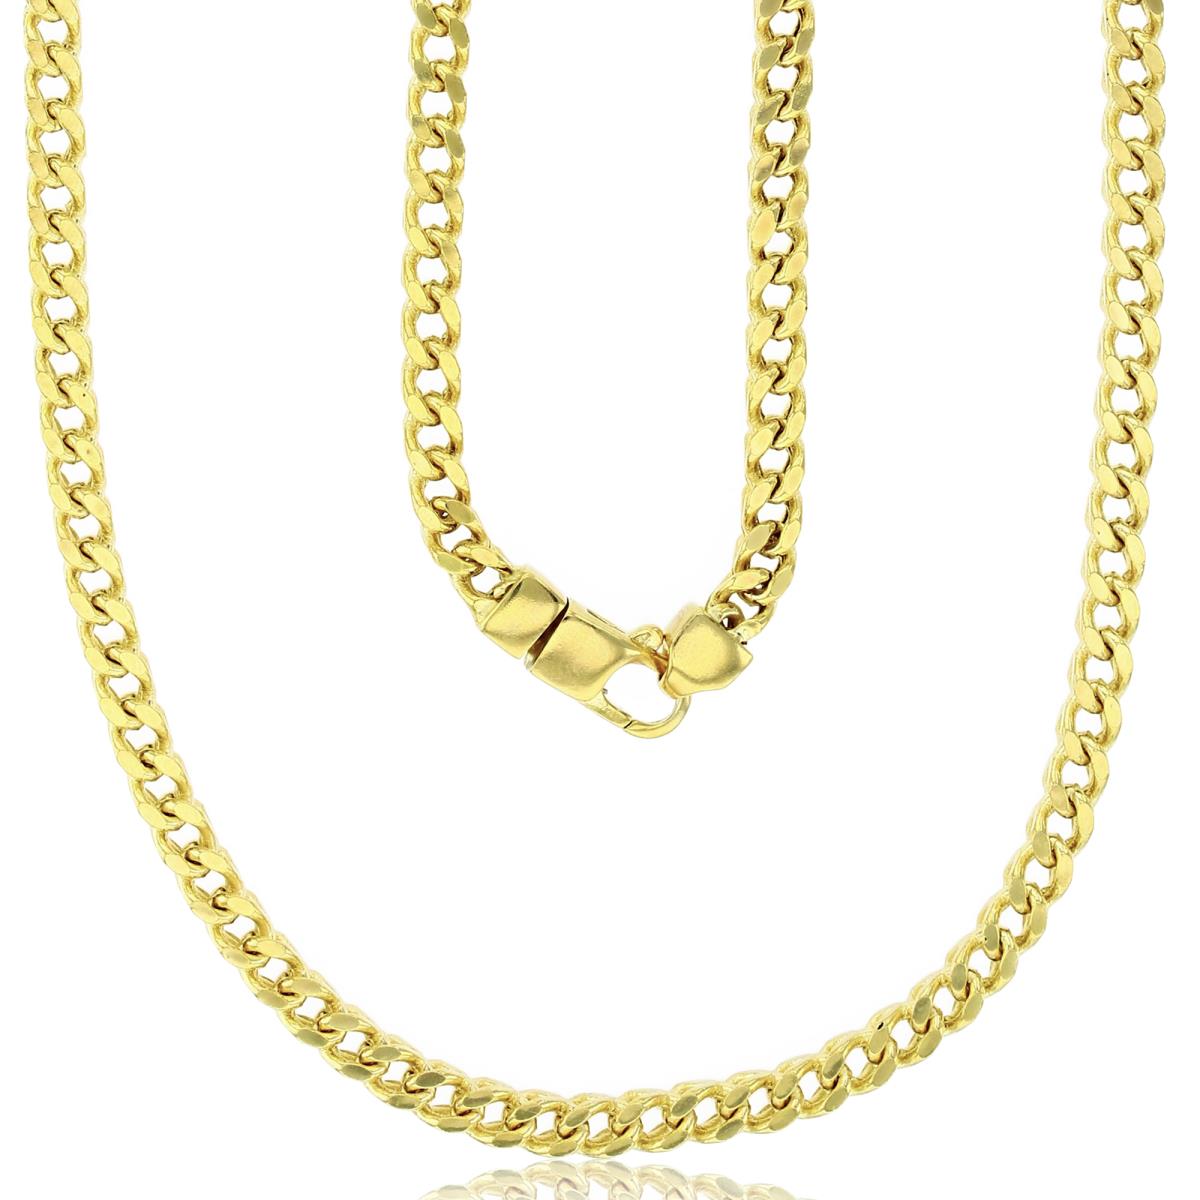 14K Yellow Gold 4.00mm 32" 120 Hollow Franco Chain